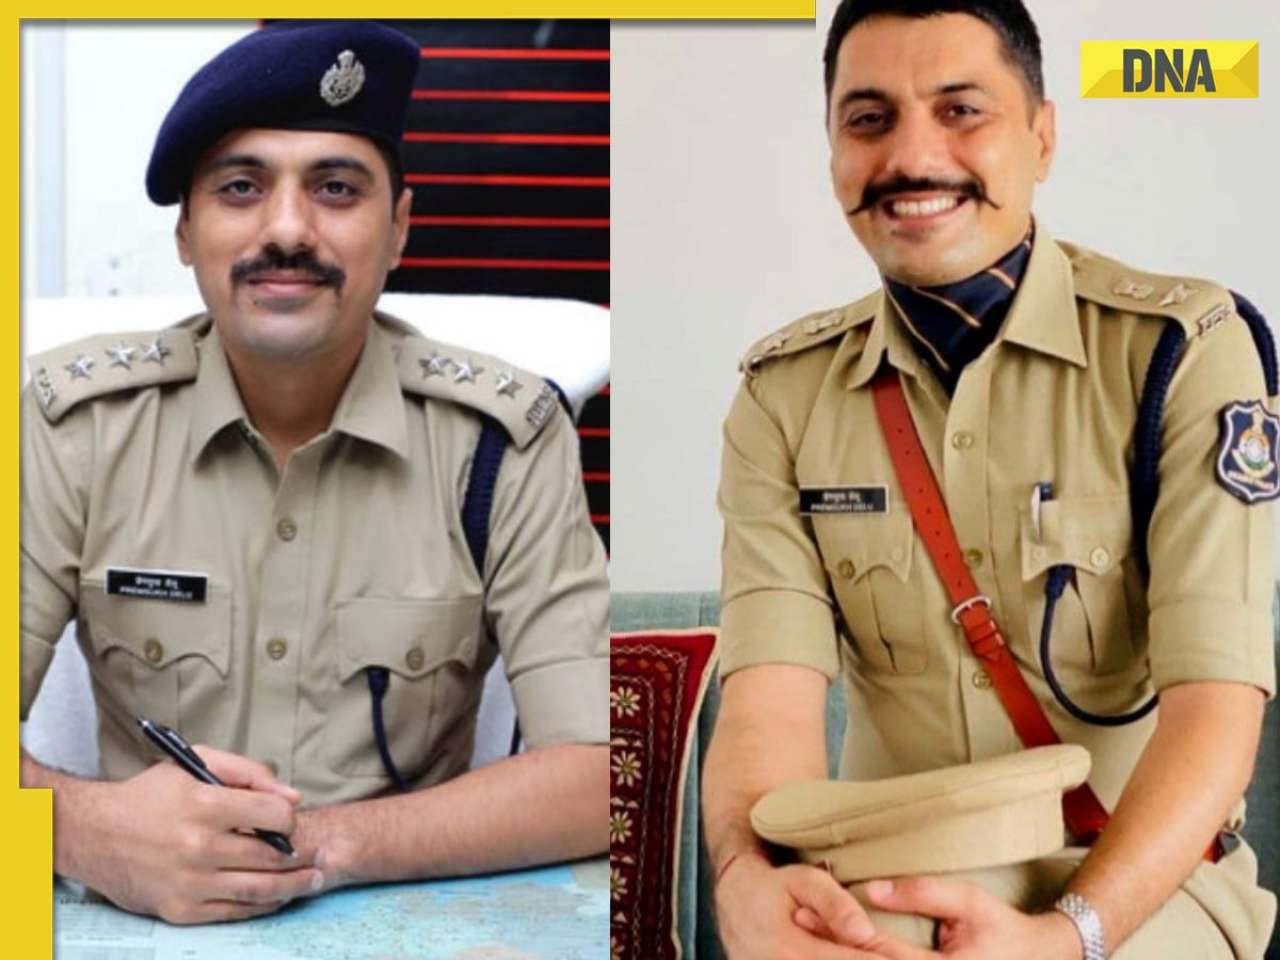 Meet man, son of a camel-cart puller, who secured 12 government jobs in 6 years including UPSC, became IPS with AIR...